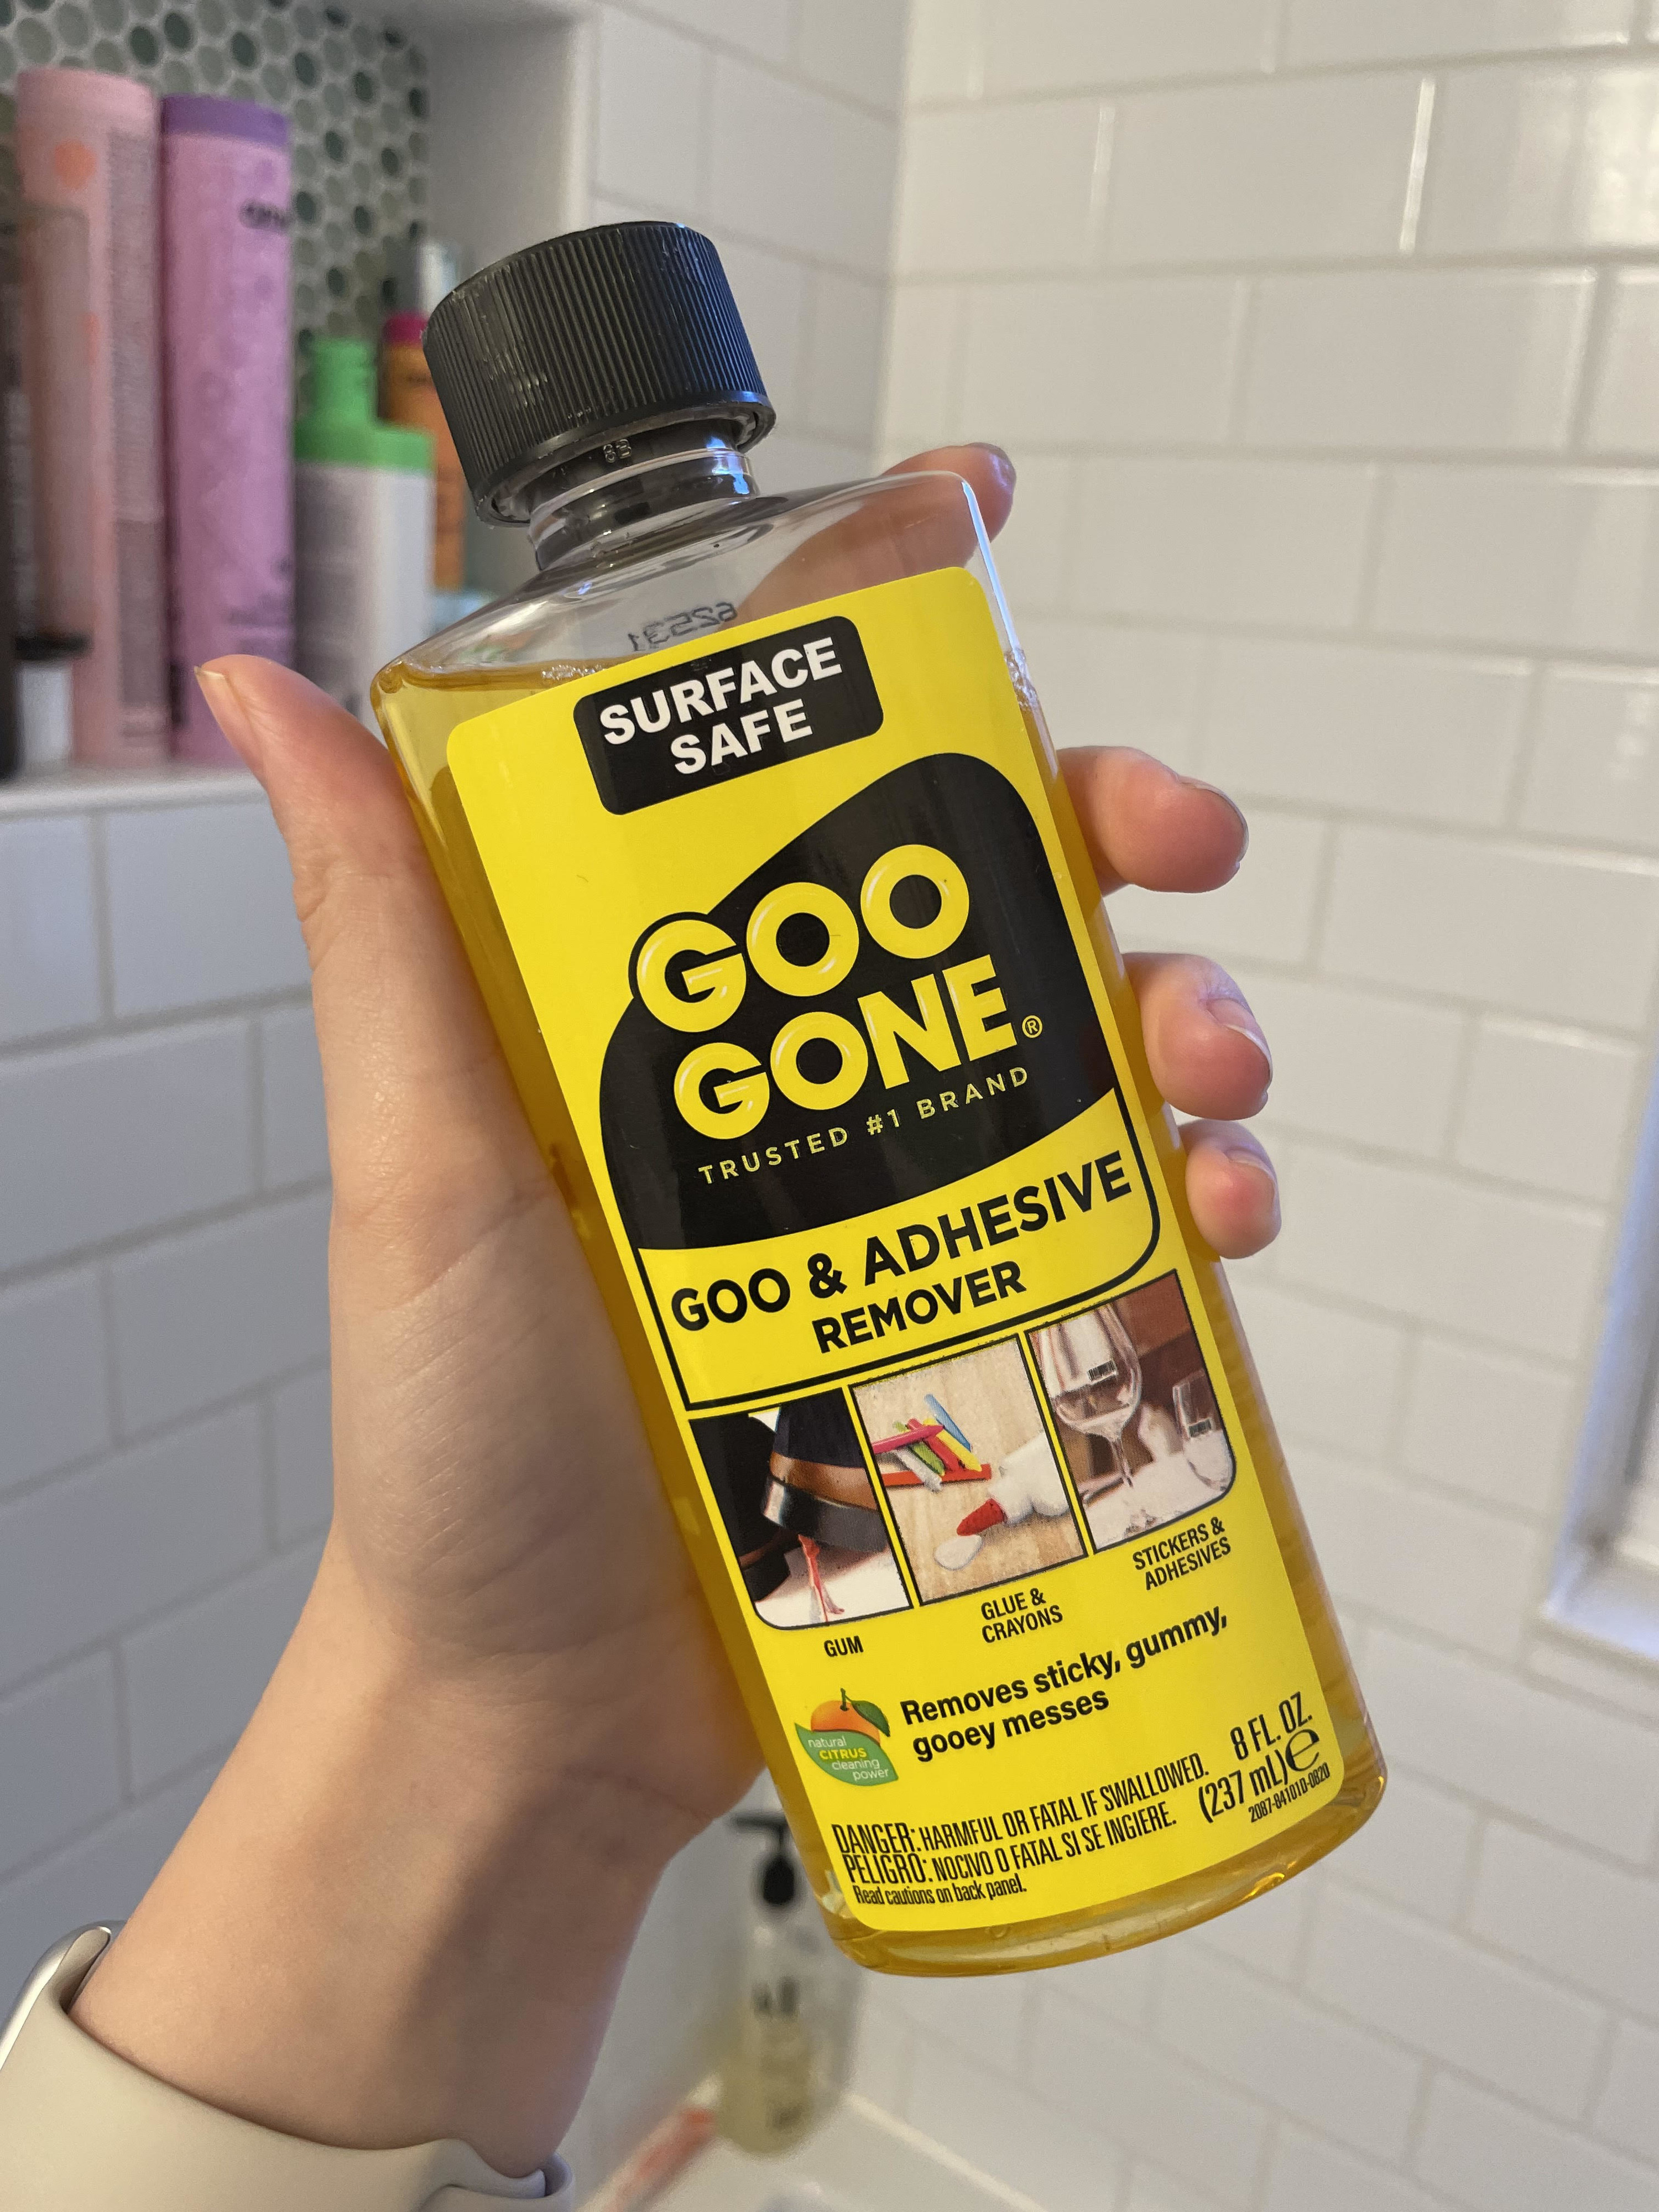 Alice holding up a bottle of Goo Gone in her shower